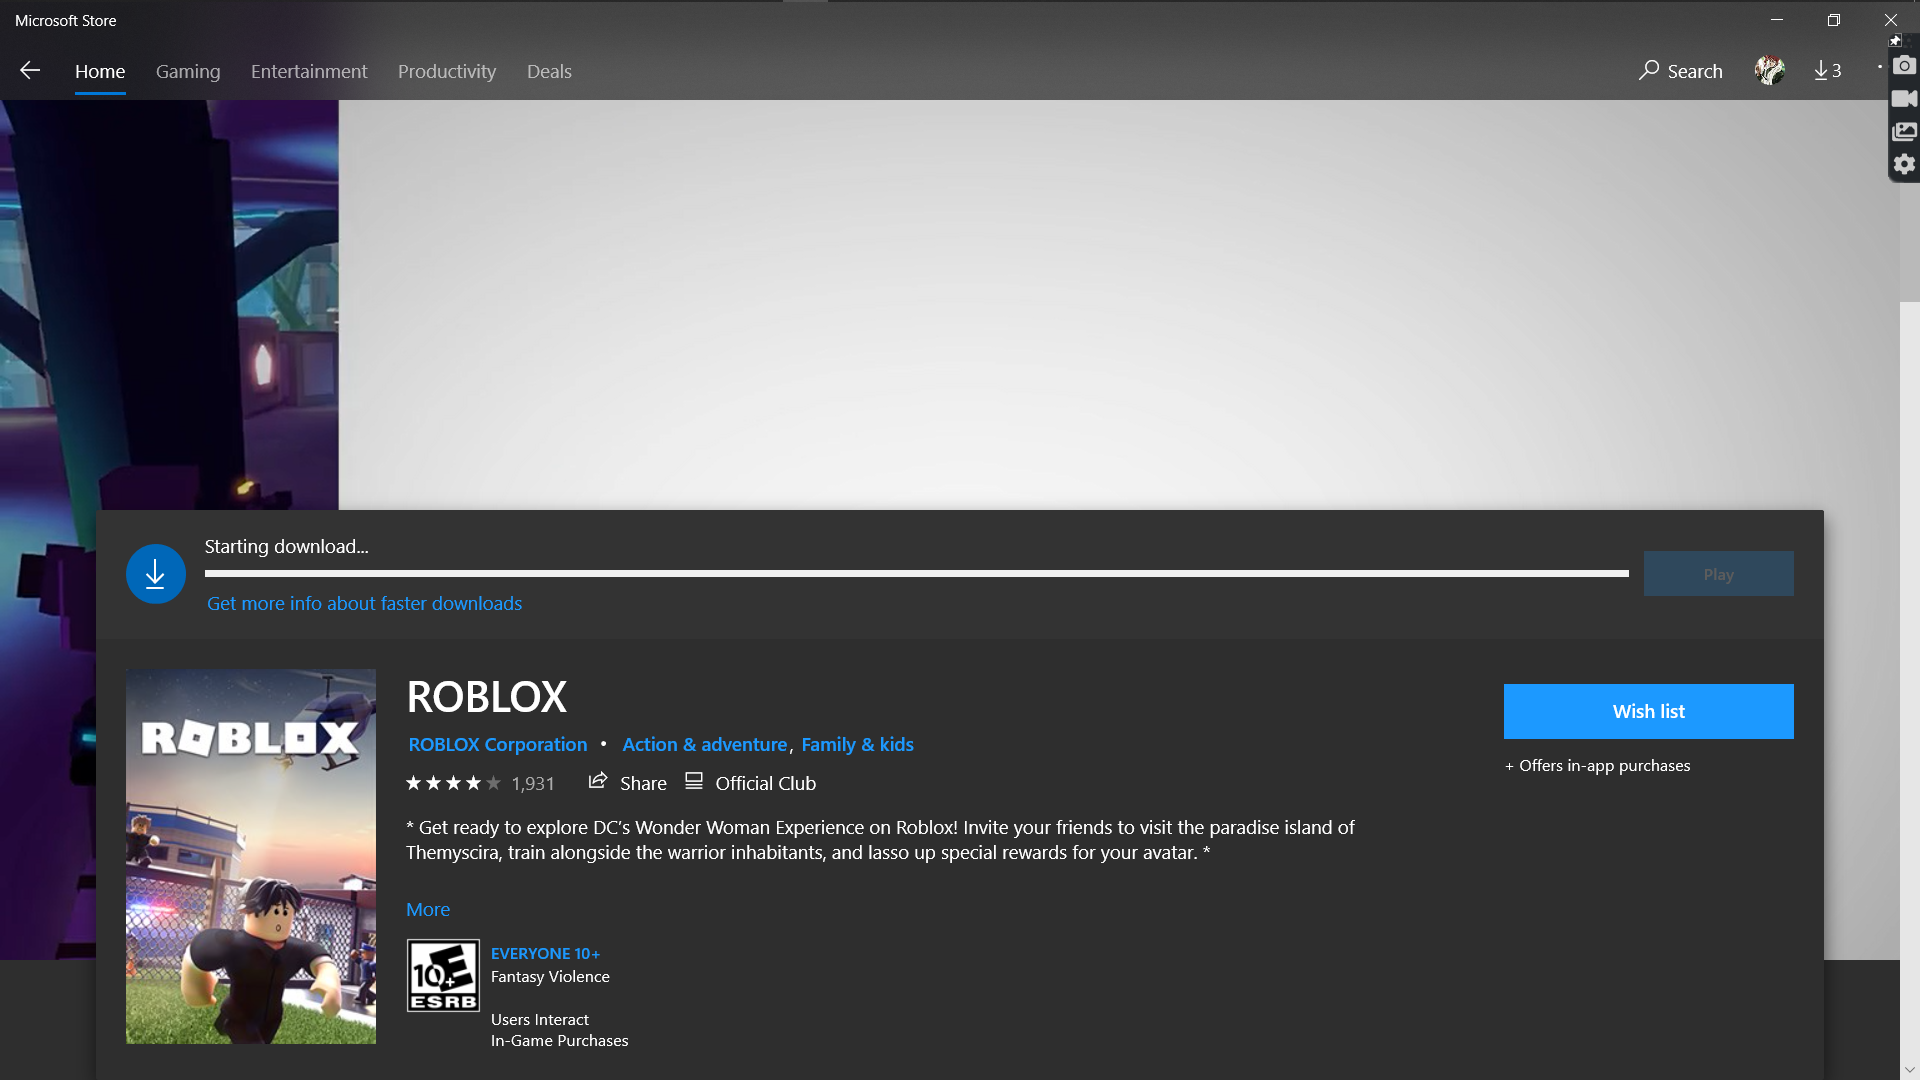 Roblox not downloading from microsoft store - Microsoft Community